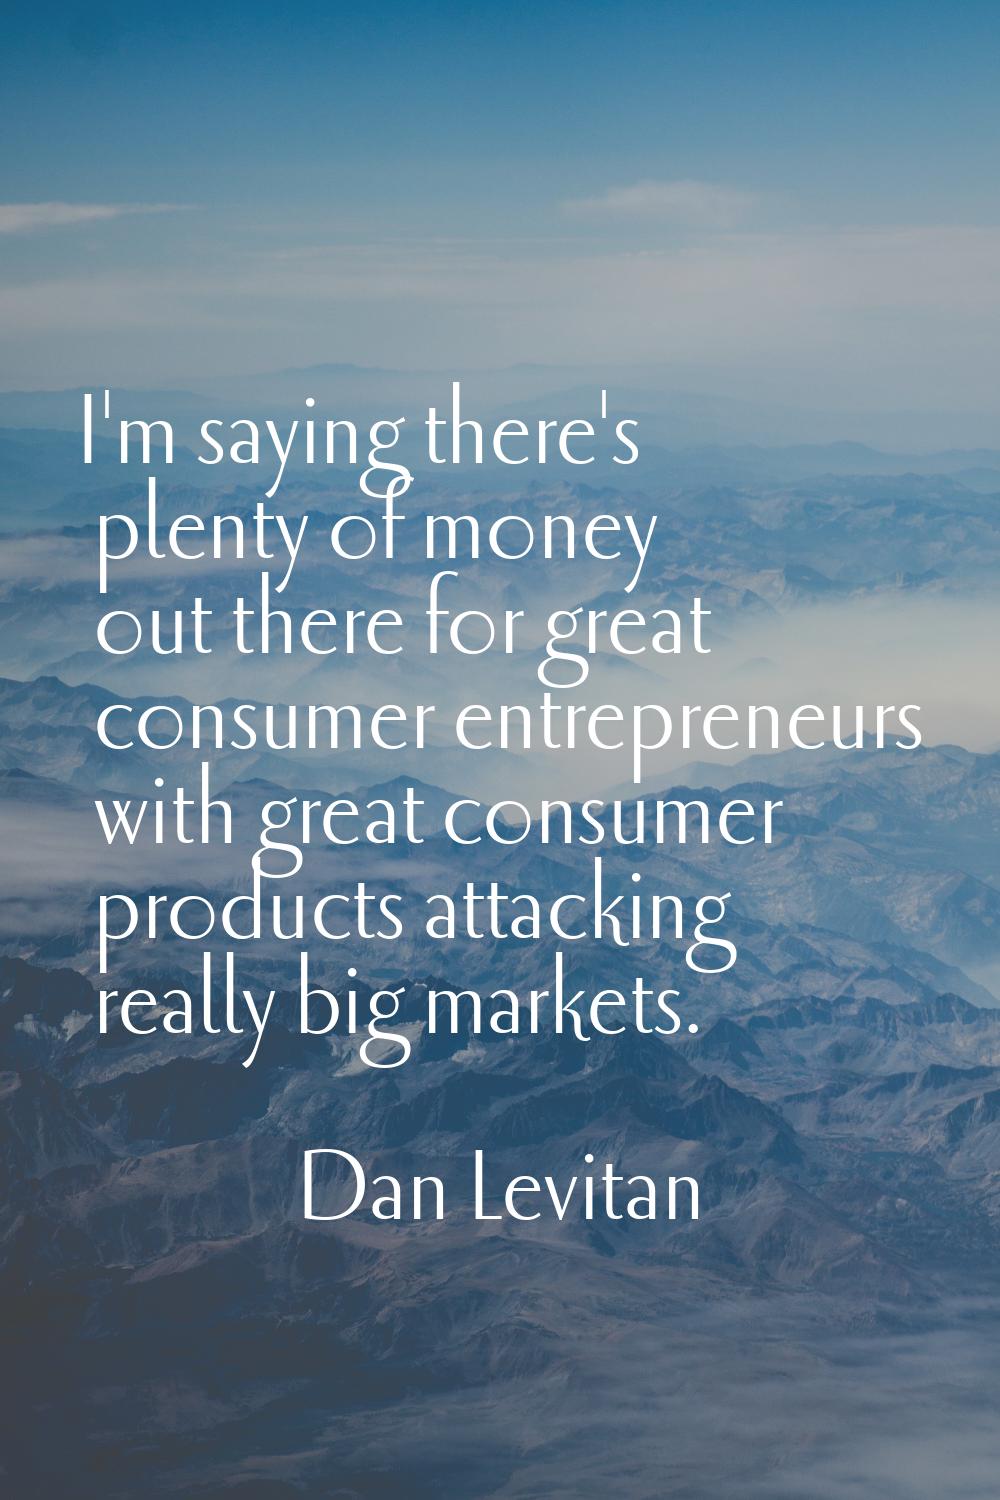 I'm saying there's plenty of money out there for great consumer entrepreneurs with great consumer p